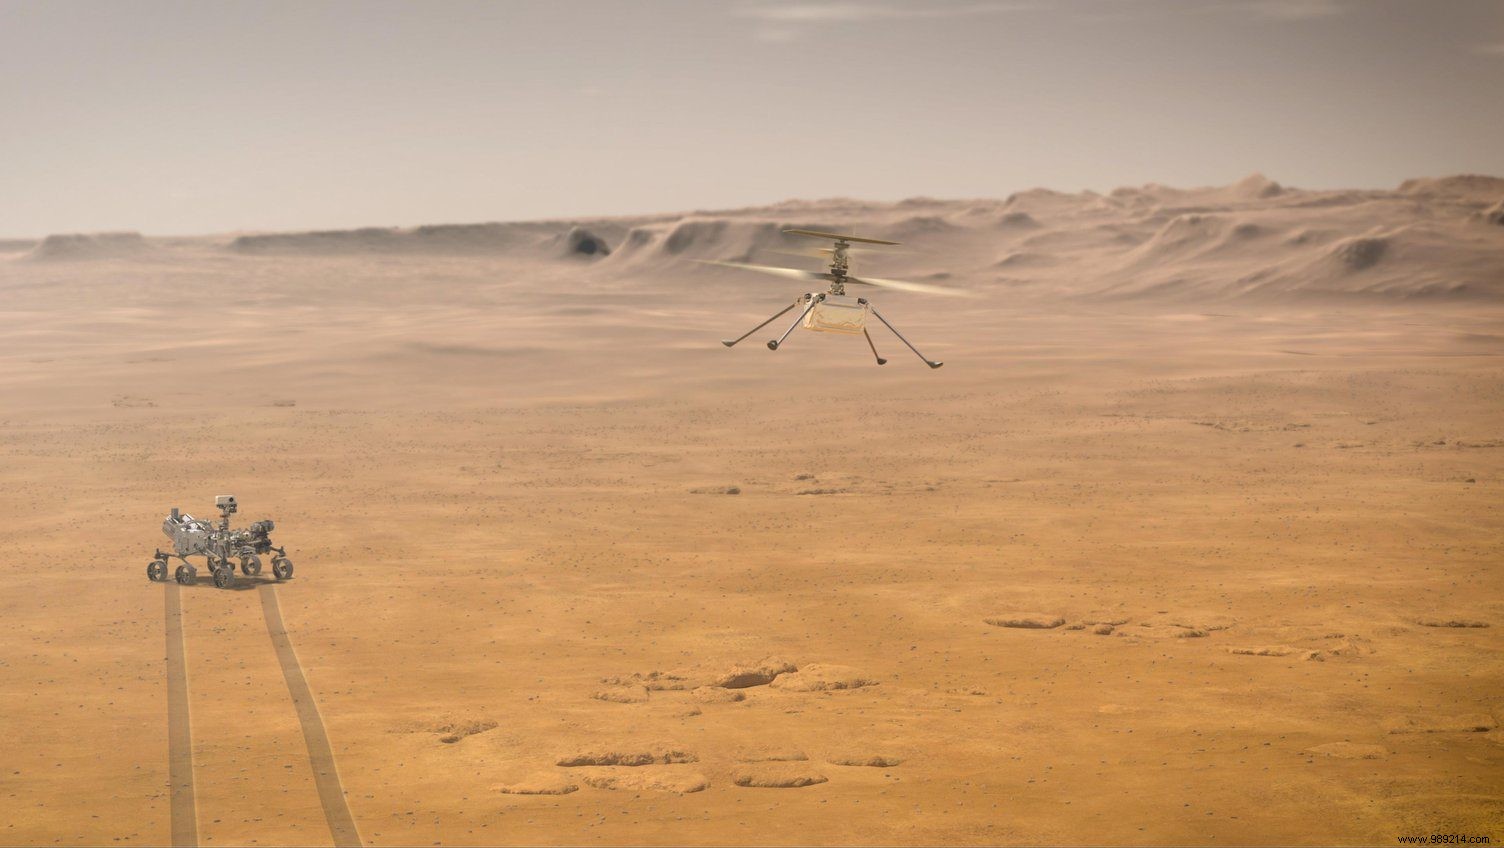 What will Ingenuity s next missions be on Mars? 